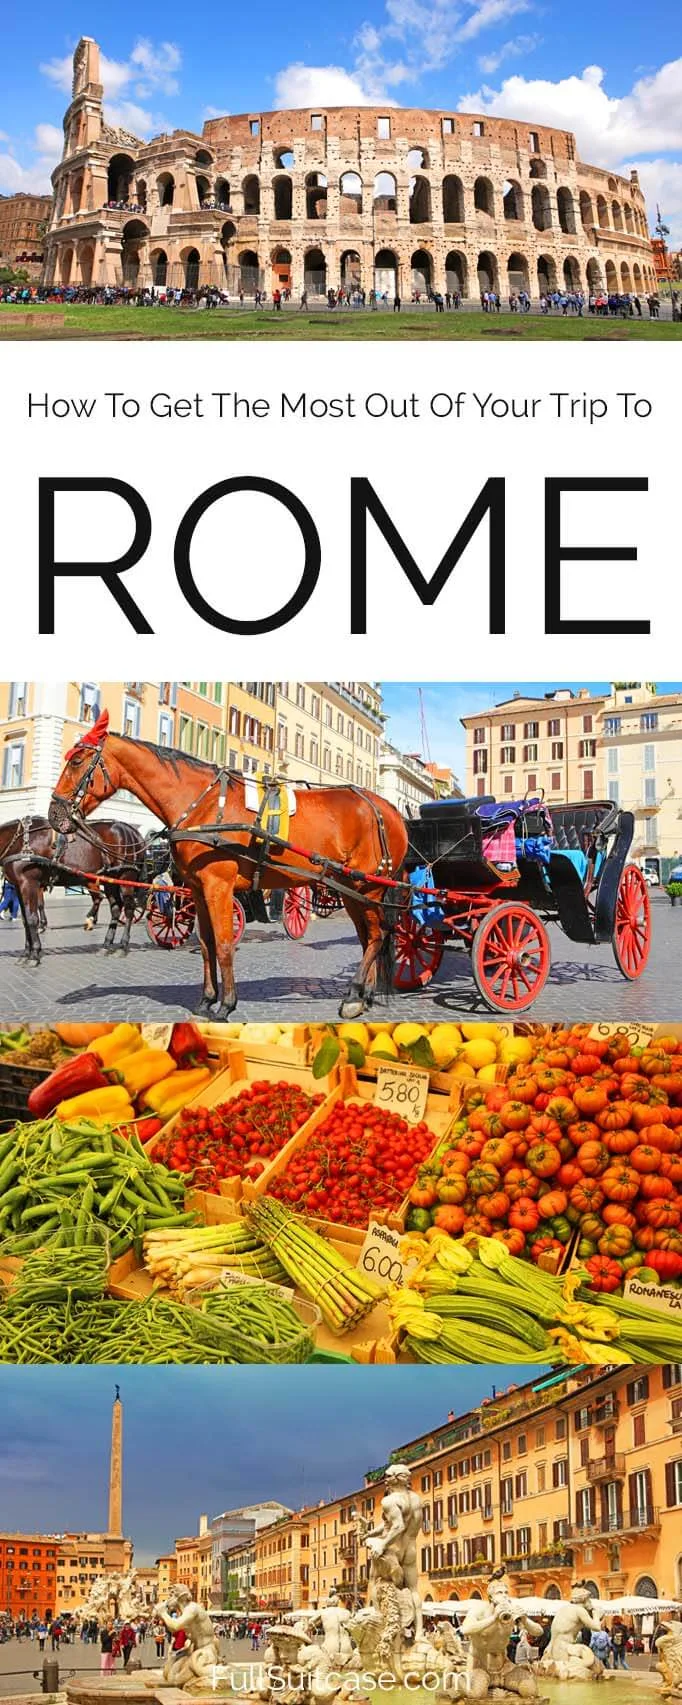 How to get the most out of your trip to Rome - tips for a better experience